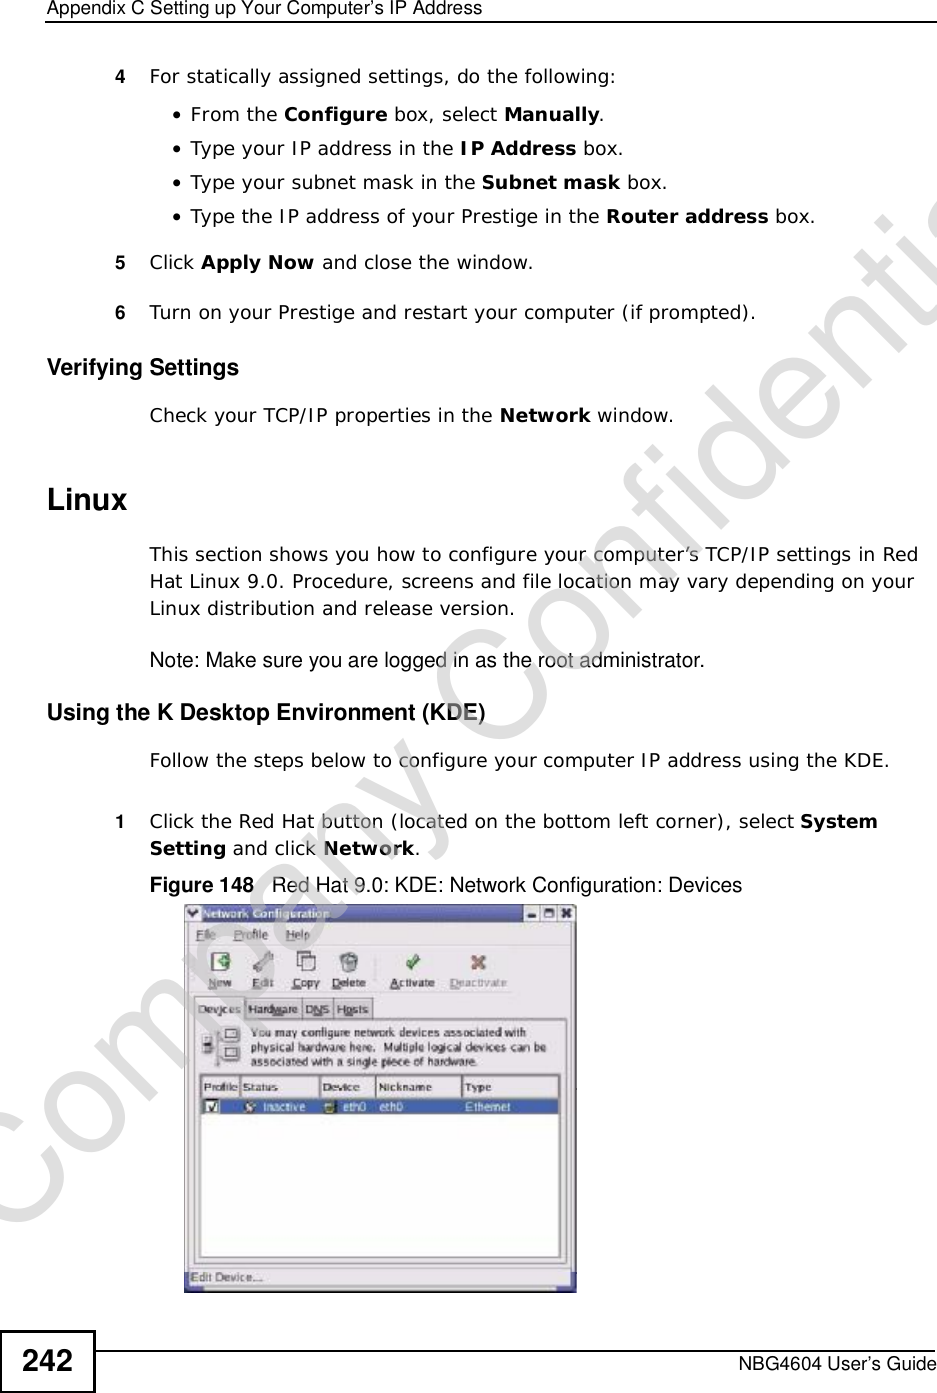 Appendix CSetting up Your Computer’s IP AddressNBG4604 User’s Guide2424For statically assigned settings, do the following:•From the Configure box, select Manually.•Type your IP address in the IP Address box.•Type your subnet mask in the Subnet mask box.•Type the IP address of your Prestige in the Router address box.5Click Apply Now and close the window.6Turn on your Prestige and restart your computer (if prompted).Verifying SettingsCheck your TCP/IP properties in the Network window.LinuxThis section shows you how to configure your computer’s TCP/IP settings in Red Hat Linux 9.0. Procedure, screens and file location may vary depending on your Linux distribution and release version. Note: Make sure you are logged in as the root administrator. Using the K Desktop Environment (KDE)Follow the steps below to configure your computer IP address using the KDE. 1Click the Red Hat button (located on the bottom left corner), select SystemSetting and click Network.Figure 148   Red Hat 9.0: KDE: Network Configuration: Devices Company Confidential